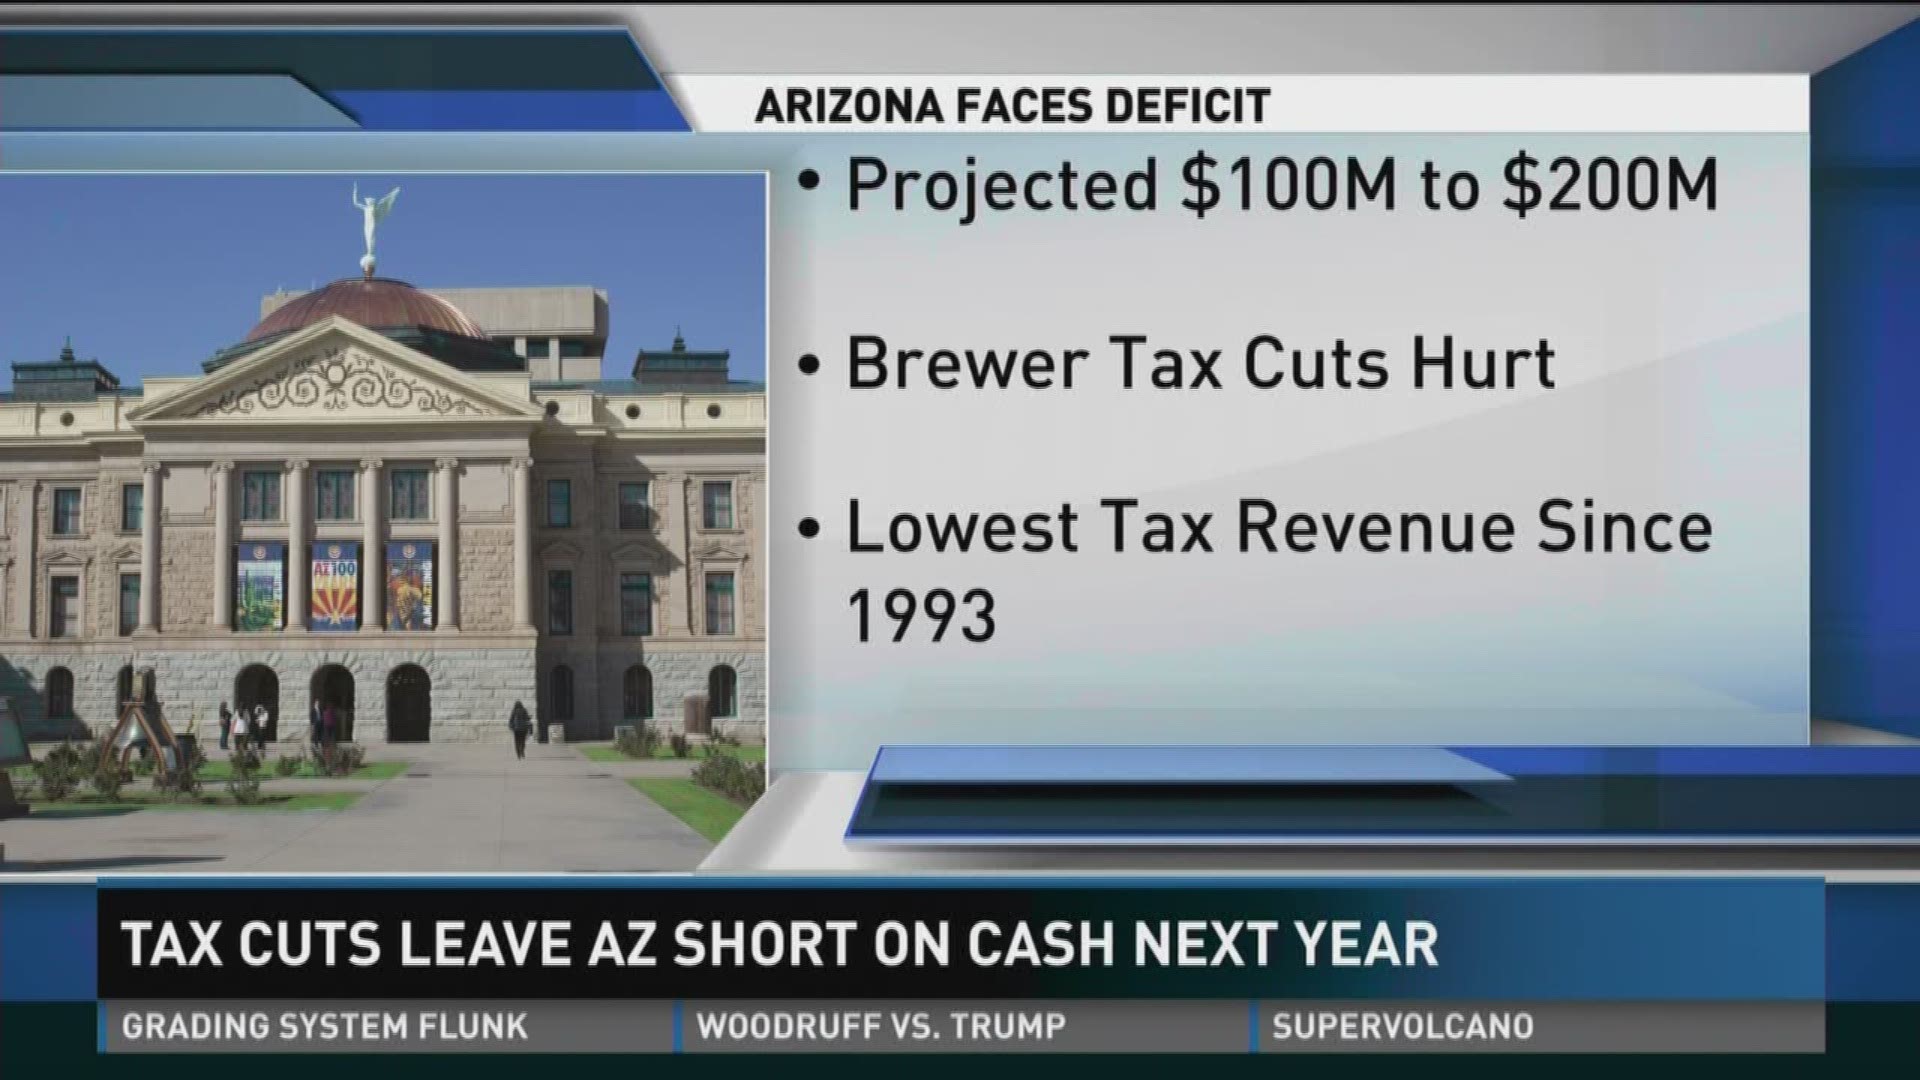 Are big tax cuts the reason for Arizona's projected budget shortfall this year and next, even as the economy improves?